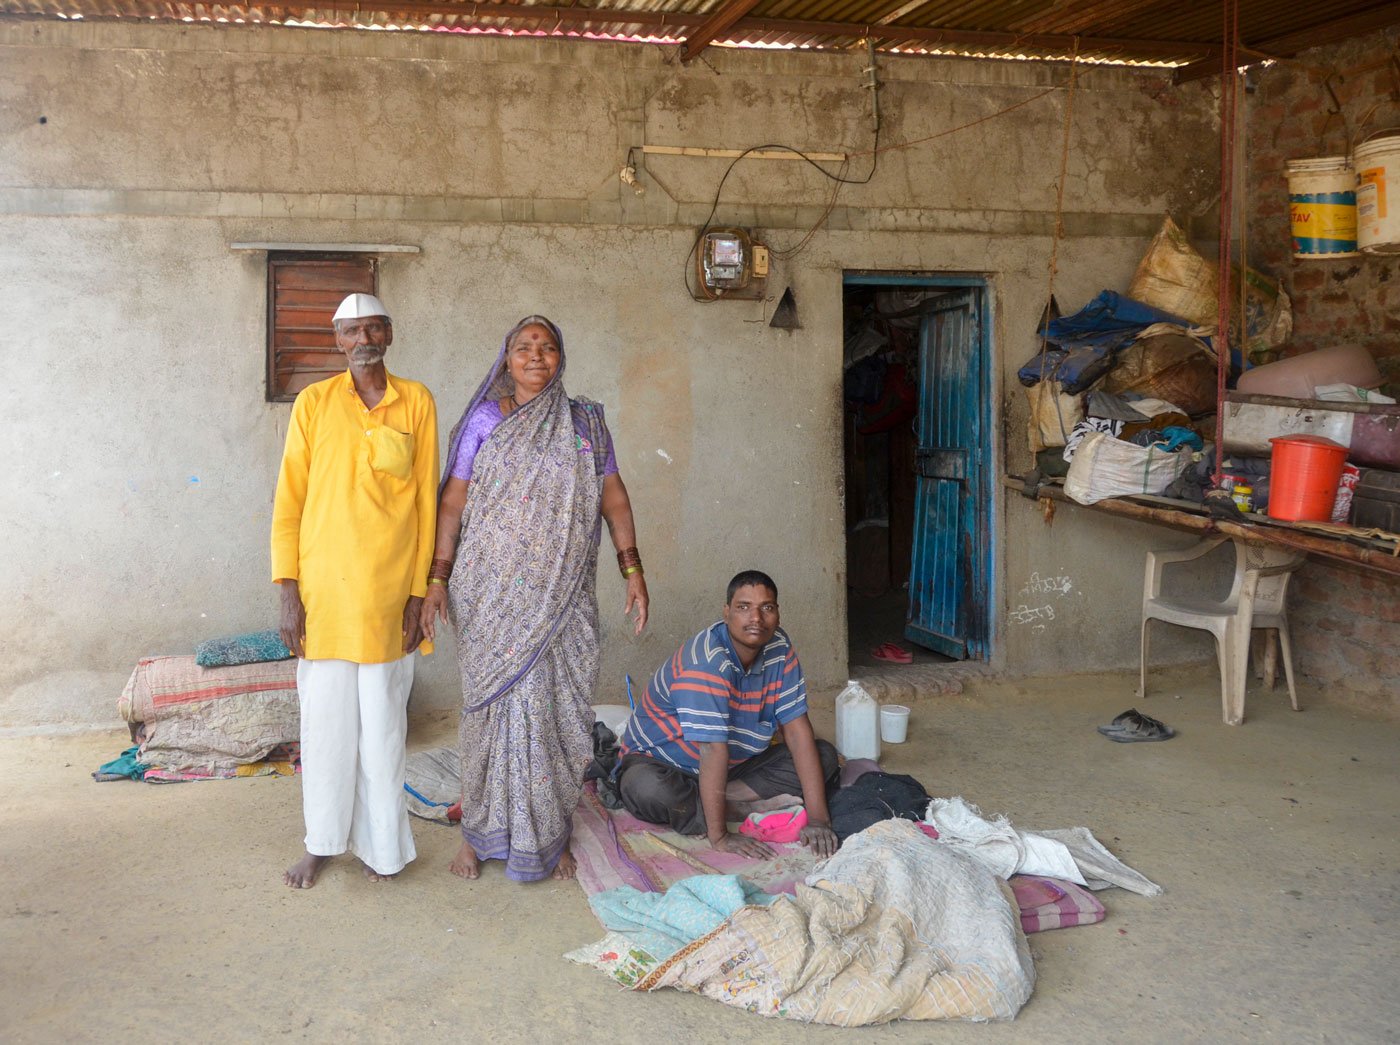 Shantabai and Dhulya Kale with their son Sandeep, at their one-room home on the outskirts of Karade village (file photo)